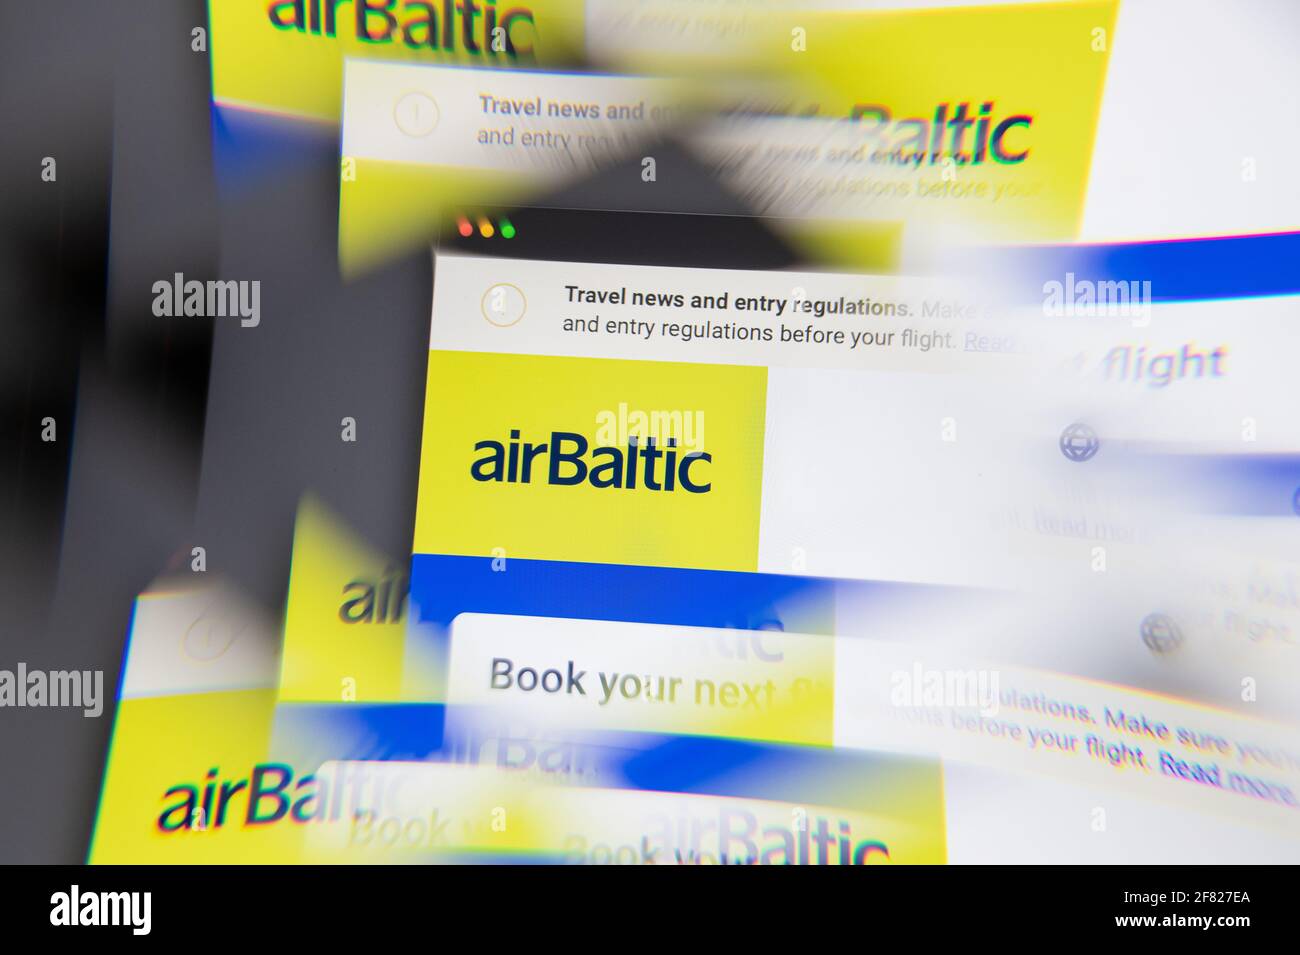 Milan, Italy - APRIL 10, 2021: airBaltic logo on laptop screen seen through an optical prism. Dynamic and unique image from airBaltic website. Illustr Stock Photo